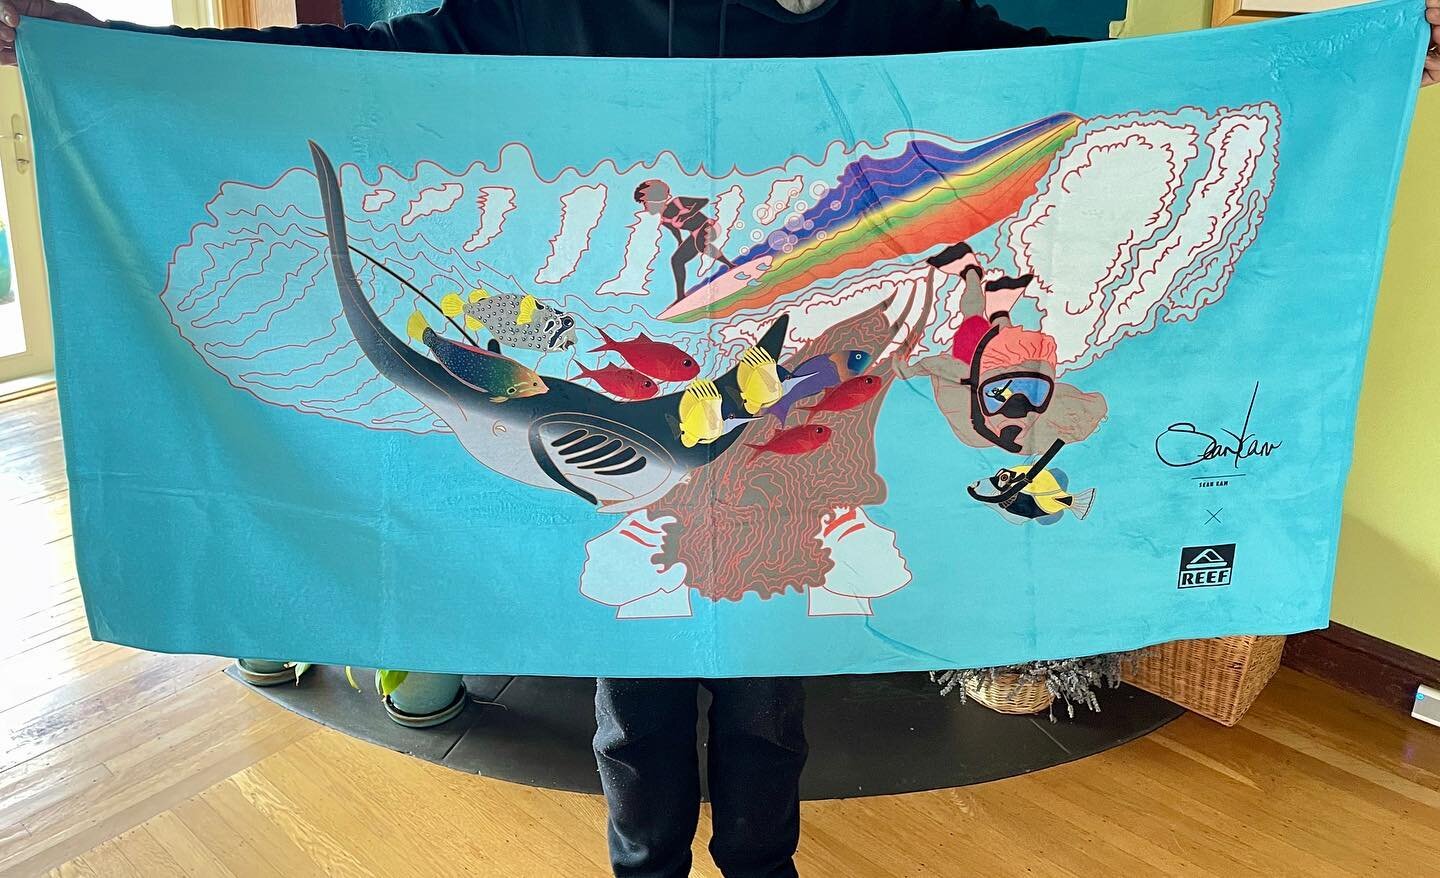 Our friend - @seankaipokam - San Diego surfer, dressmaker, artist - was one of four queer artists chosen by surf brand Reef to design a beach towel for Pride month. All proceeds from sales of the beach towels go to PFLAG. Sean&rsquo;s design is just 